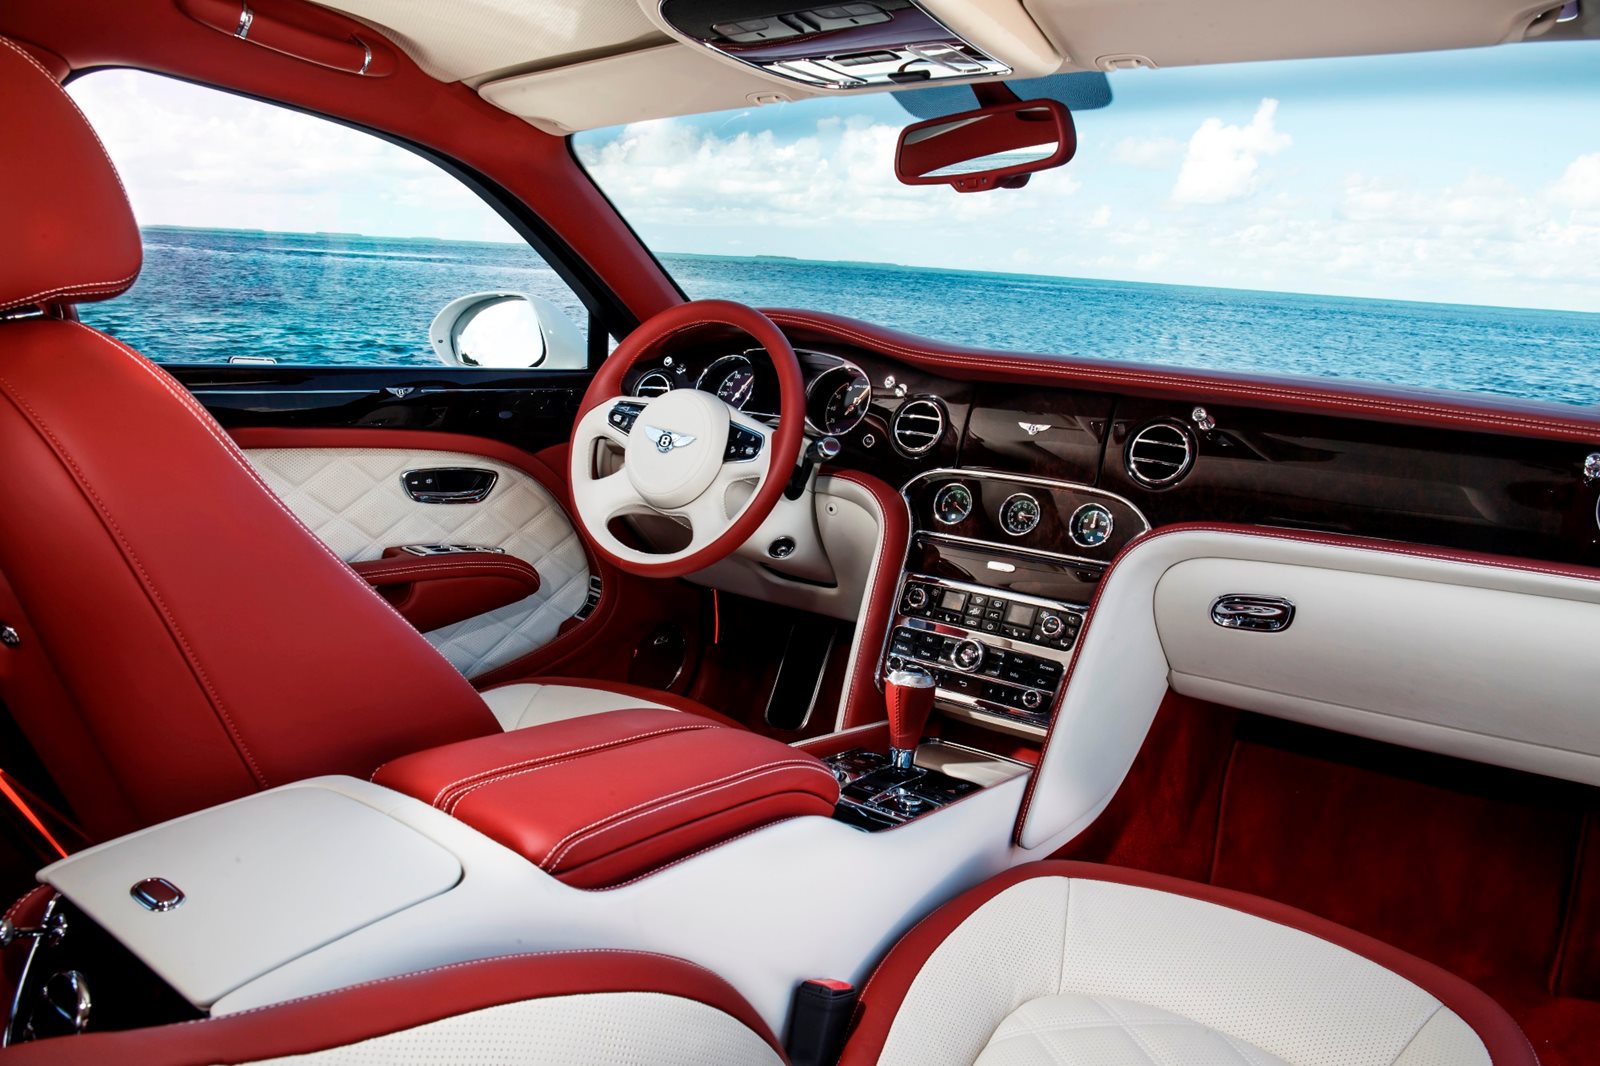 2020 Bentley Mulsanne Speed Interior Dimensions: Seating, Cargo Space &  Trunk Size - Photos | CarBuzz